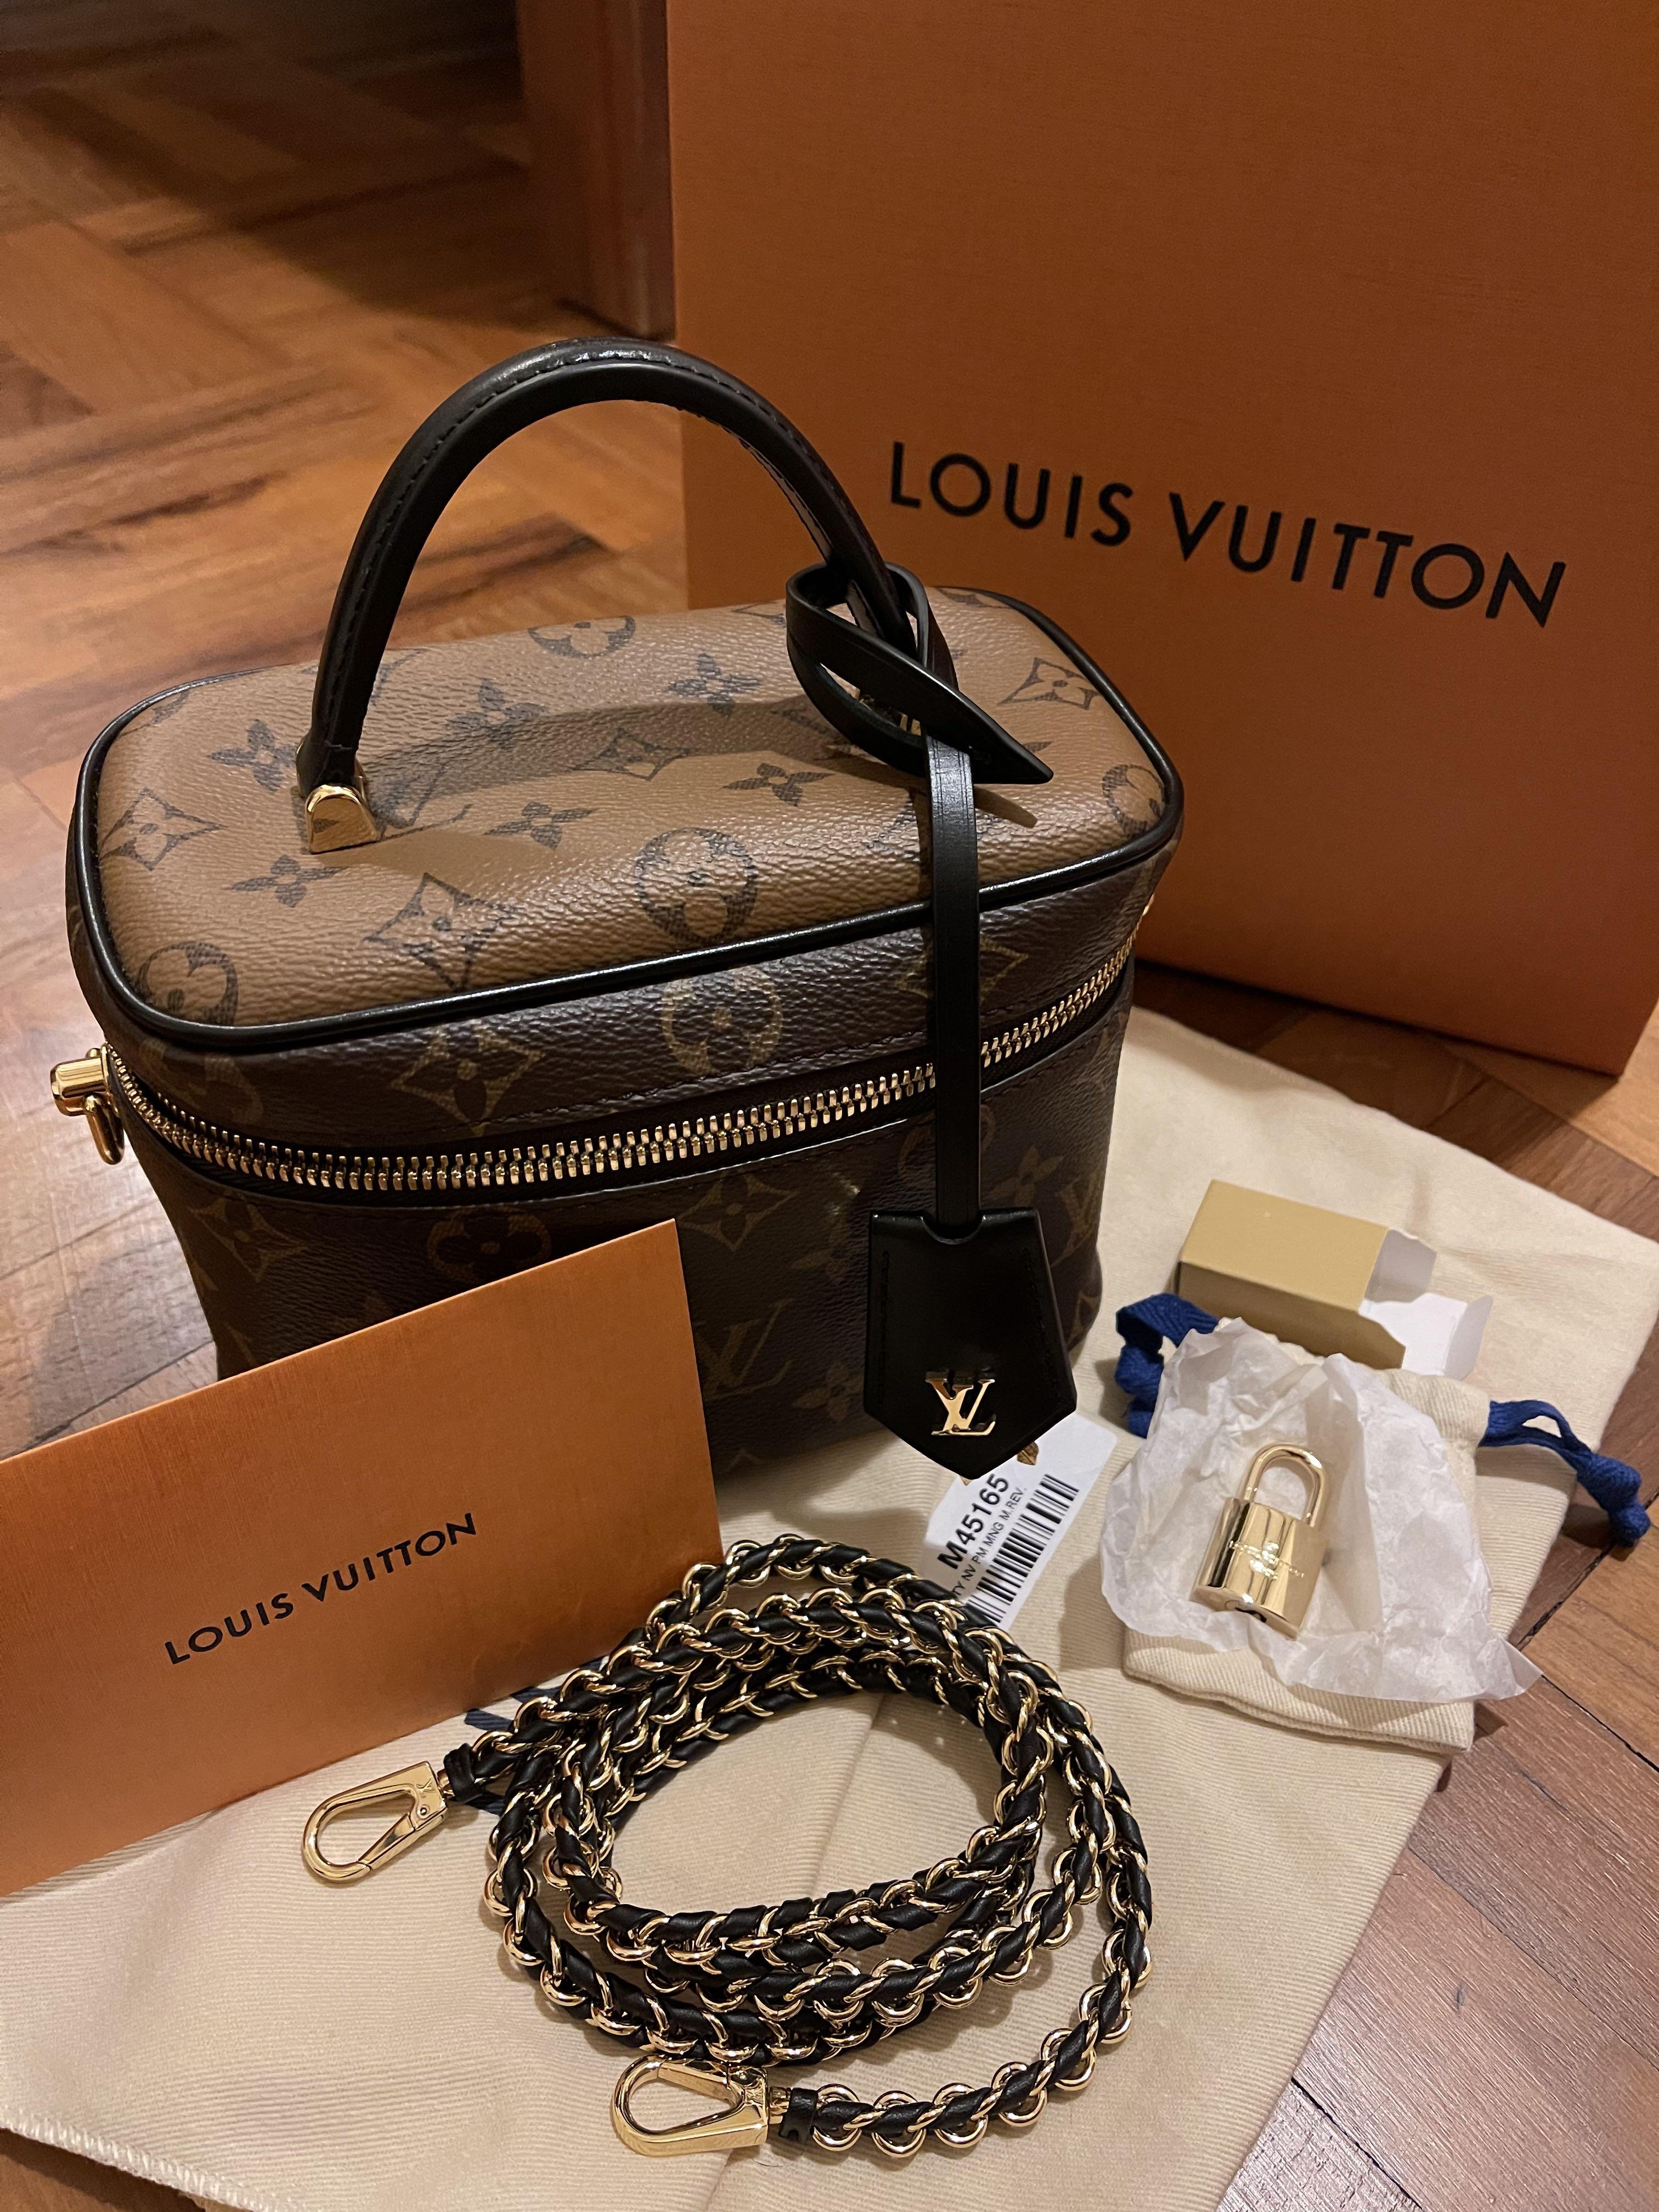 LOUIS VUITTON VANITY PM REVIEW & WHAT FITS INSIDE SEPT 2020 